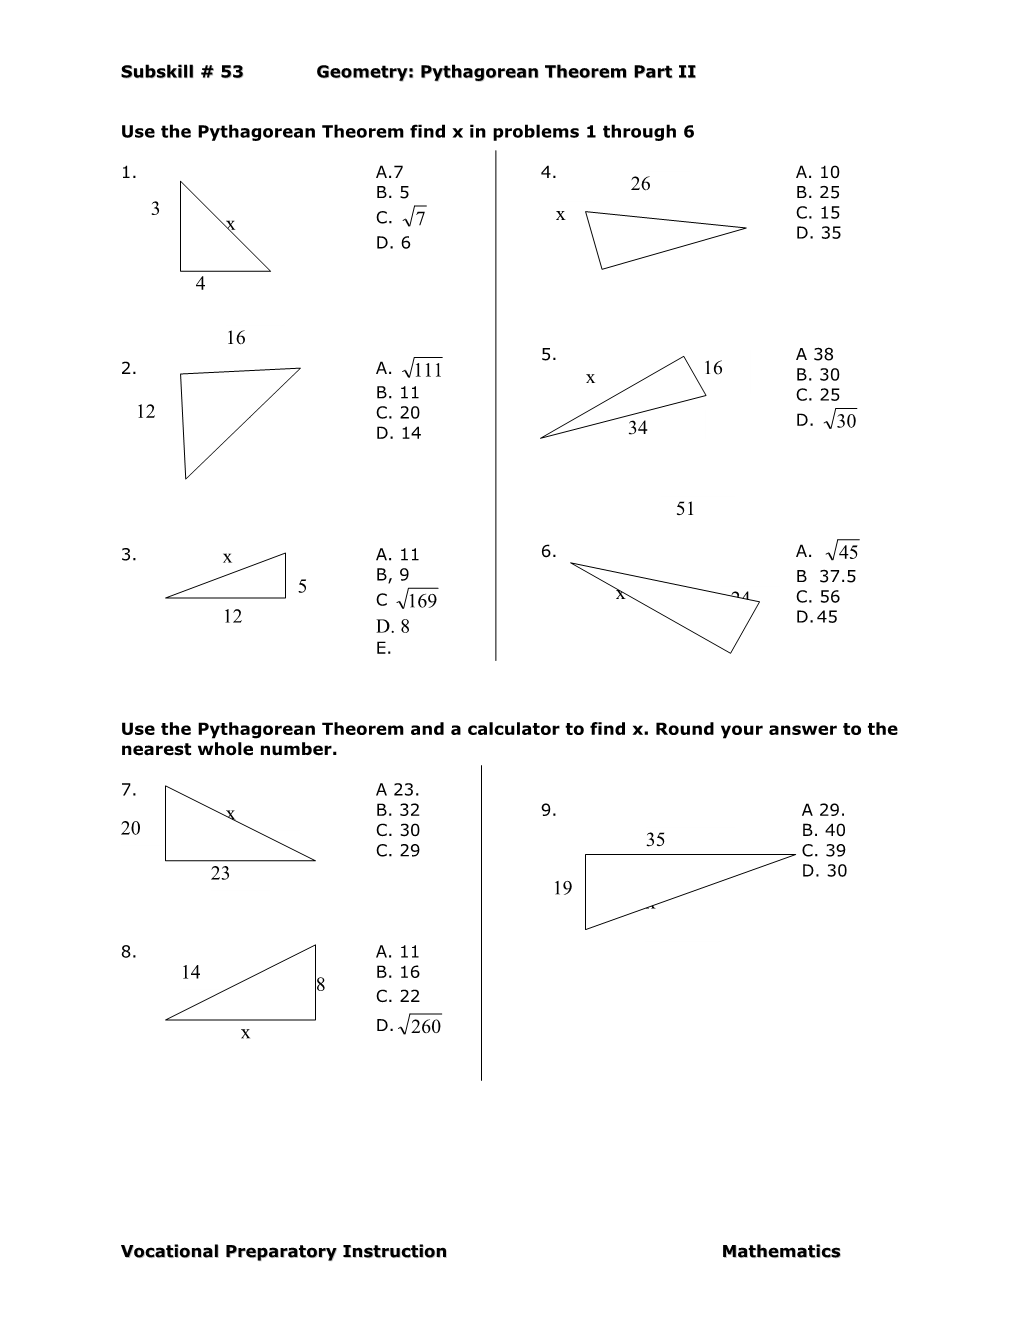 Use the Pythagorean Theorem Find X in Problems 1 Through 6